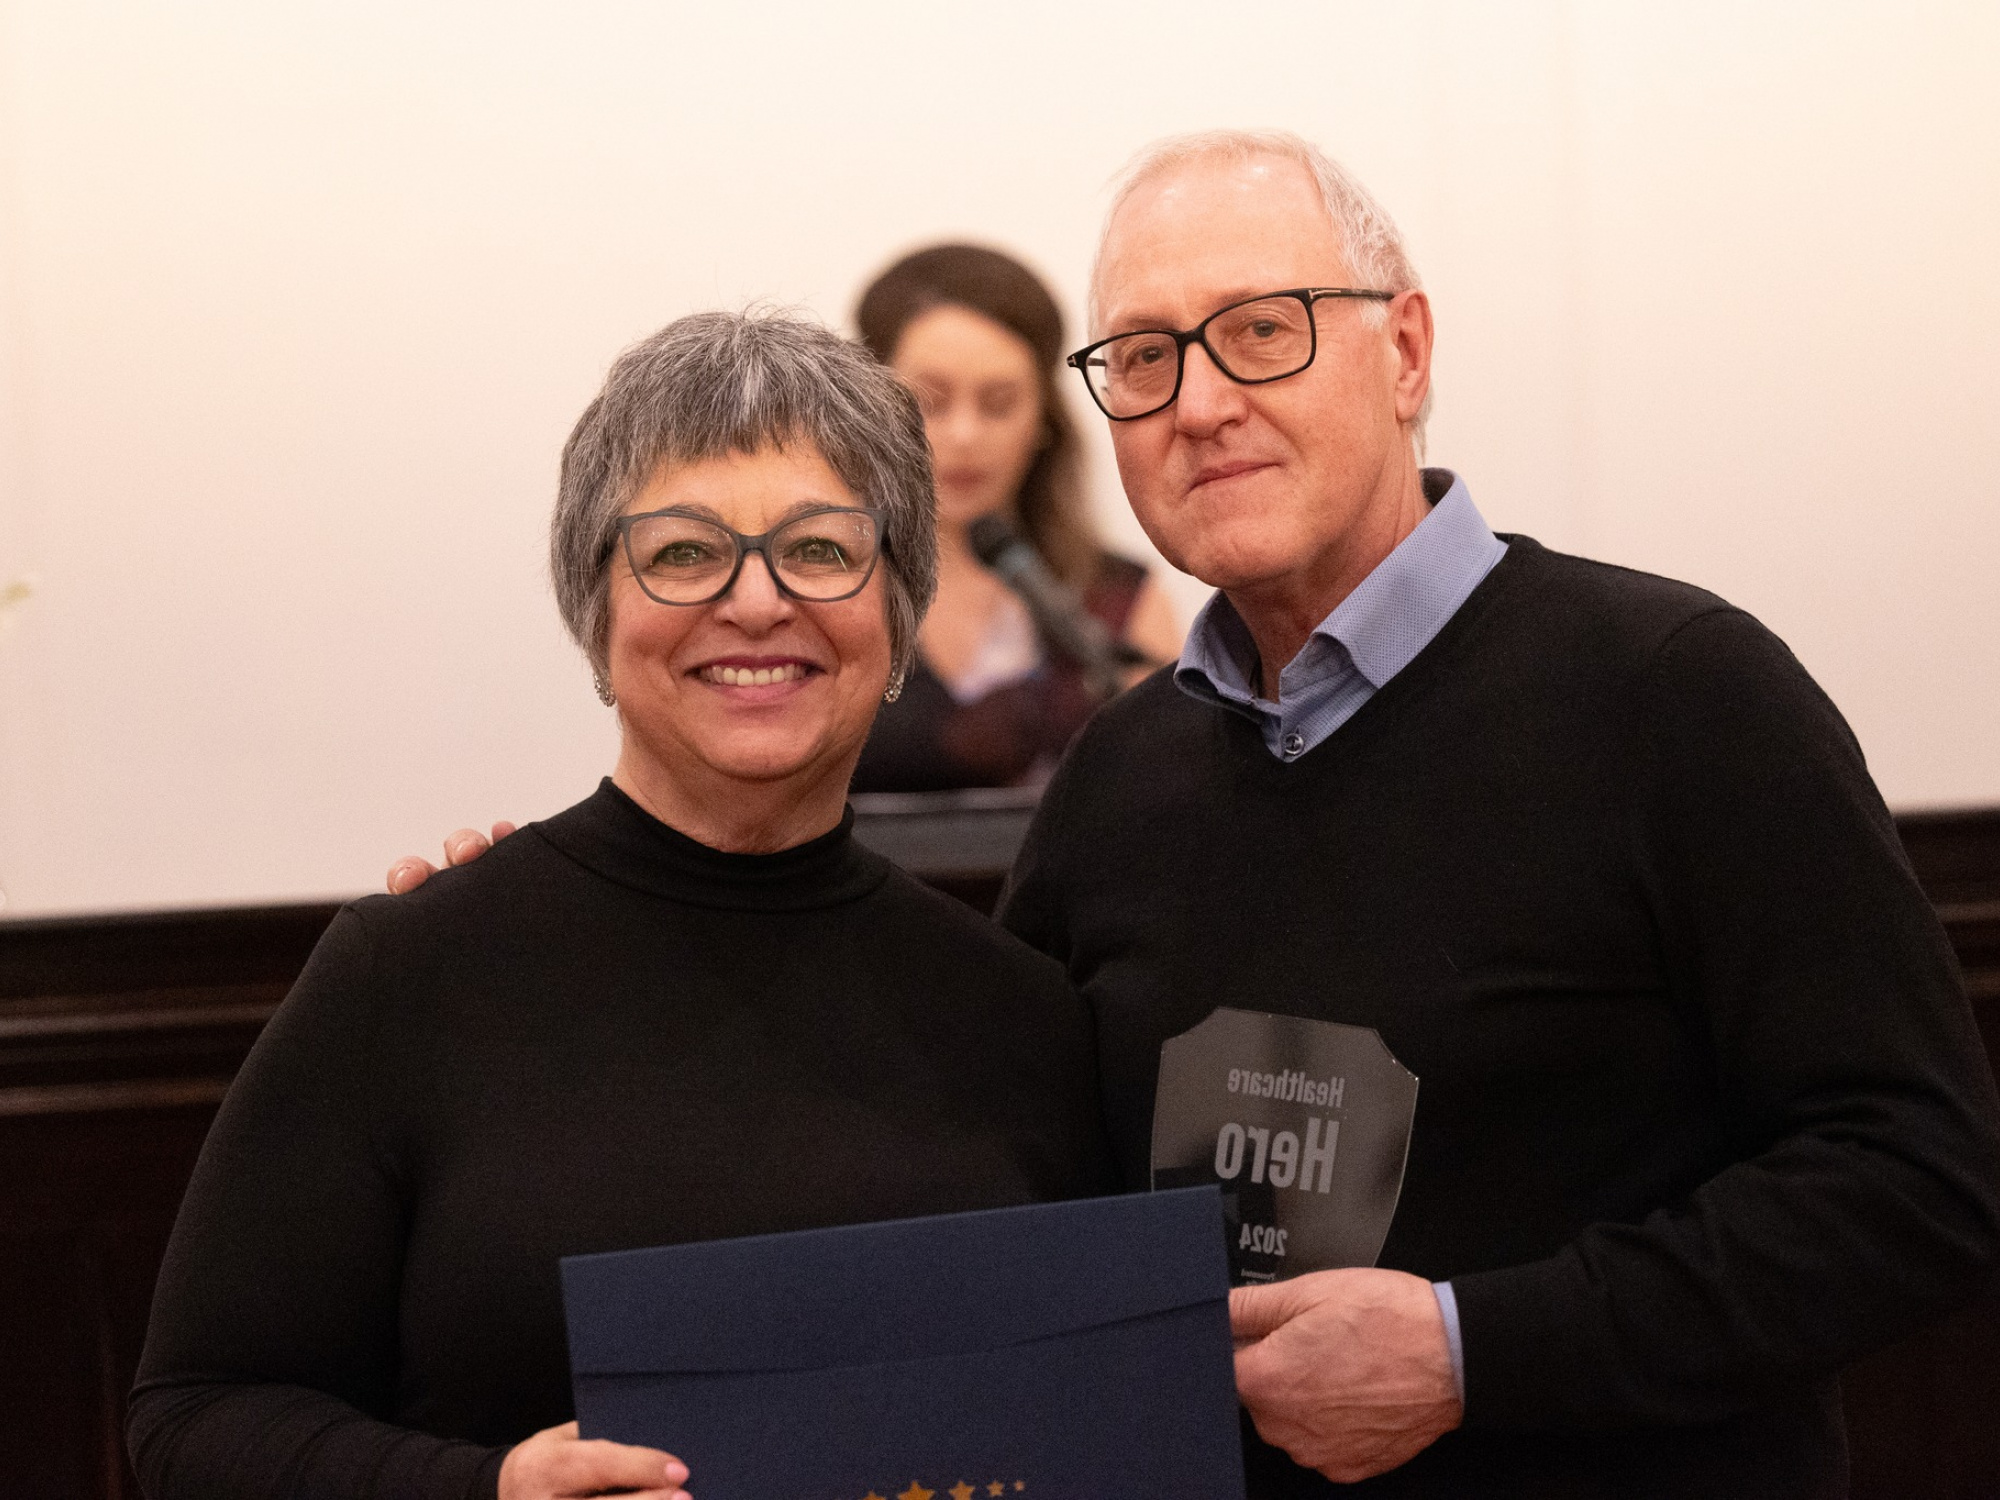 Yarmouth Mayor Pam Mood presents Dr. Roland Muise with the Healthcare Hero Award at the 2nd Annual Physician’s Appreciation Reception in February. (Contributed)